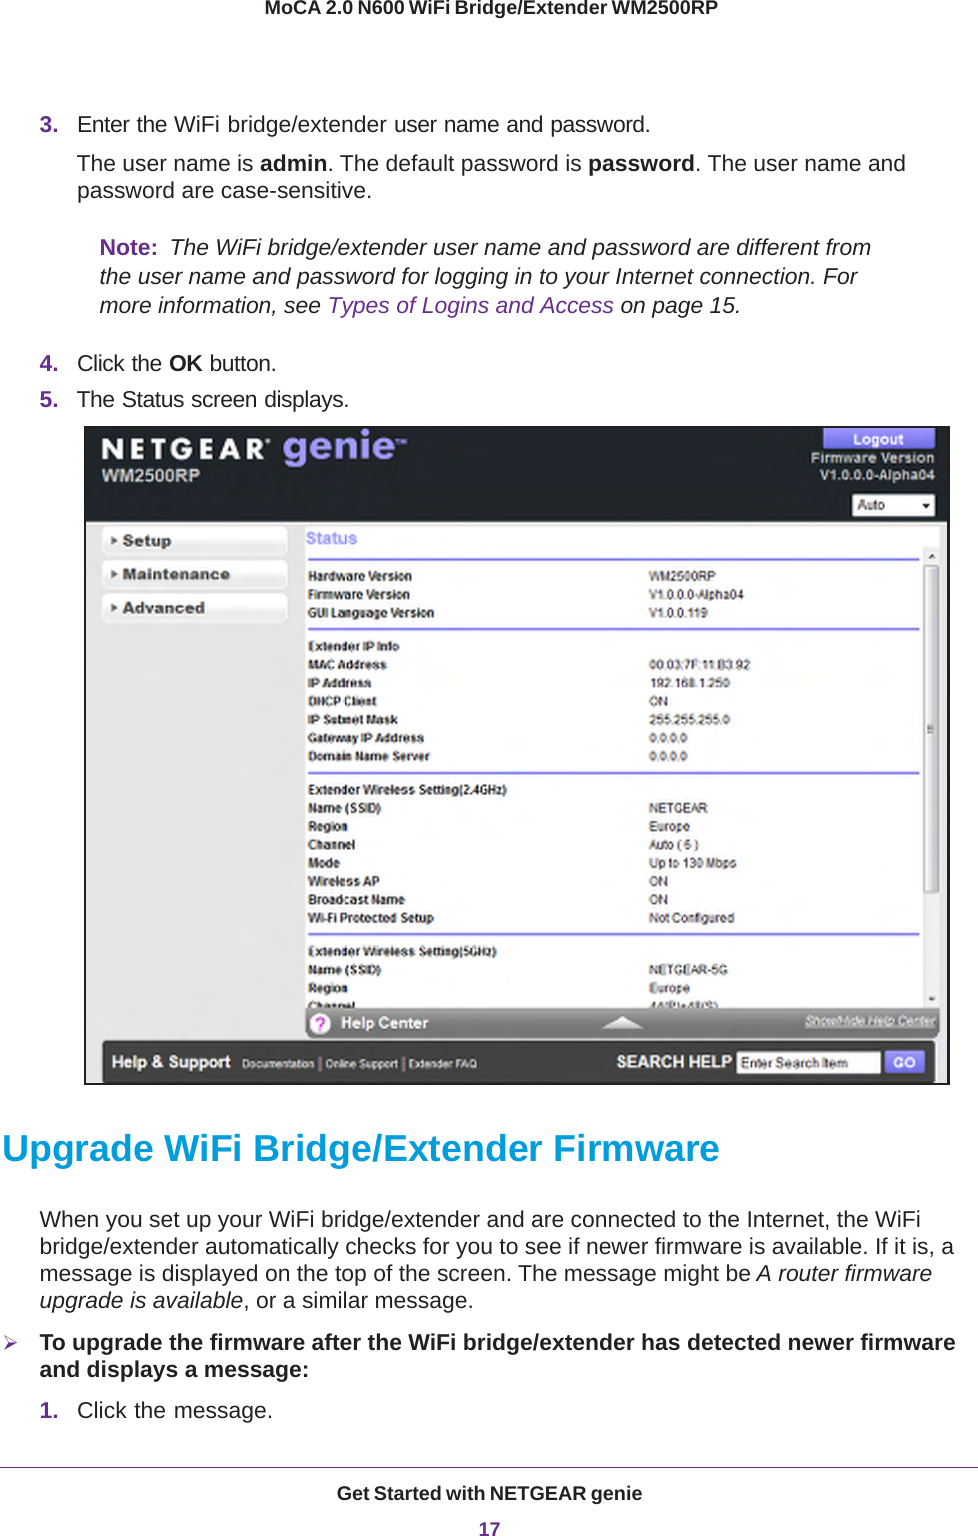 Get Started with NETGEAR genie17 MoCA 2.0 N600 WiFi Bridge/Extender WM2500RP3. Enter the WiFi bridge/extender user name and password.The user name is admin. The default password is password. The user name and password are case-sensitive.Note:  The WiFi bridge/extender user name and password are different from the user name and password for logging in to your Internet connection. For more information, see Types of Logins and Access on page  15.4. Click the OK button.5. The Status screen displays.Upgrade WiFi Bridge/Extender FirmwareWhen you set up your WiFi bridge/extender and are connected to the Internet, the WiFi bridge/extender automatically checks for you to see if newer firmware is available. If it is, a message is displayed on the top of the screen. The message might be A router firmware upgrade is available, or a similar message.To upgrade the firmware after the WiFi bridge/extender has detected newer firmware and displays a message:1. Click the message.